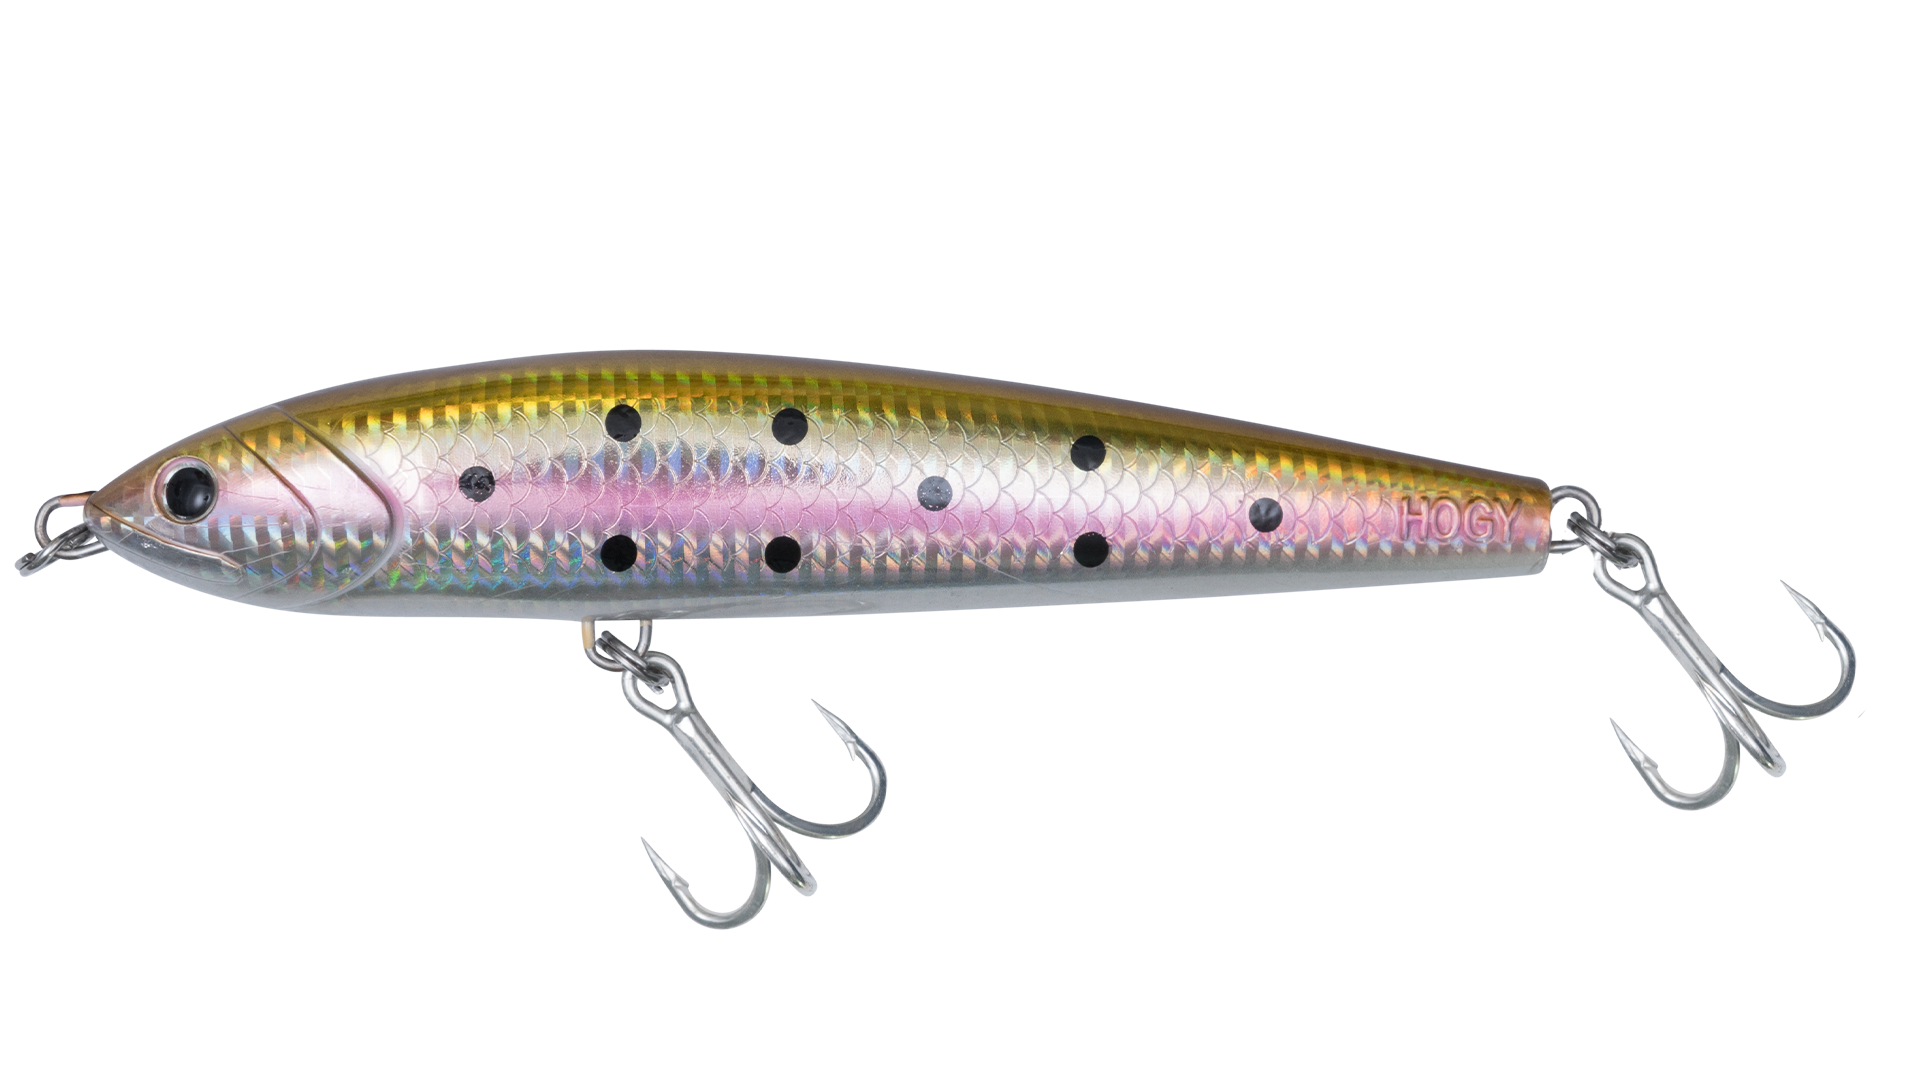 striper surf fishing lures, striper surf fishing lures Suppliers